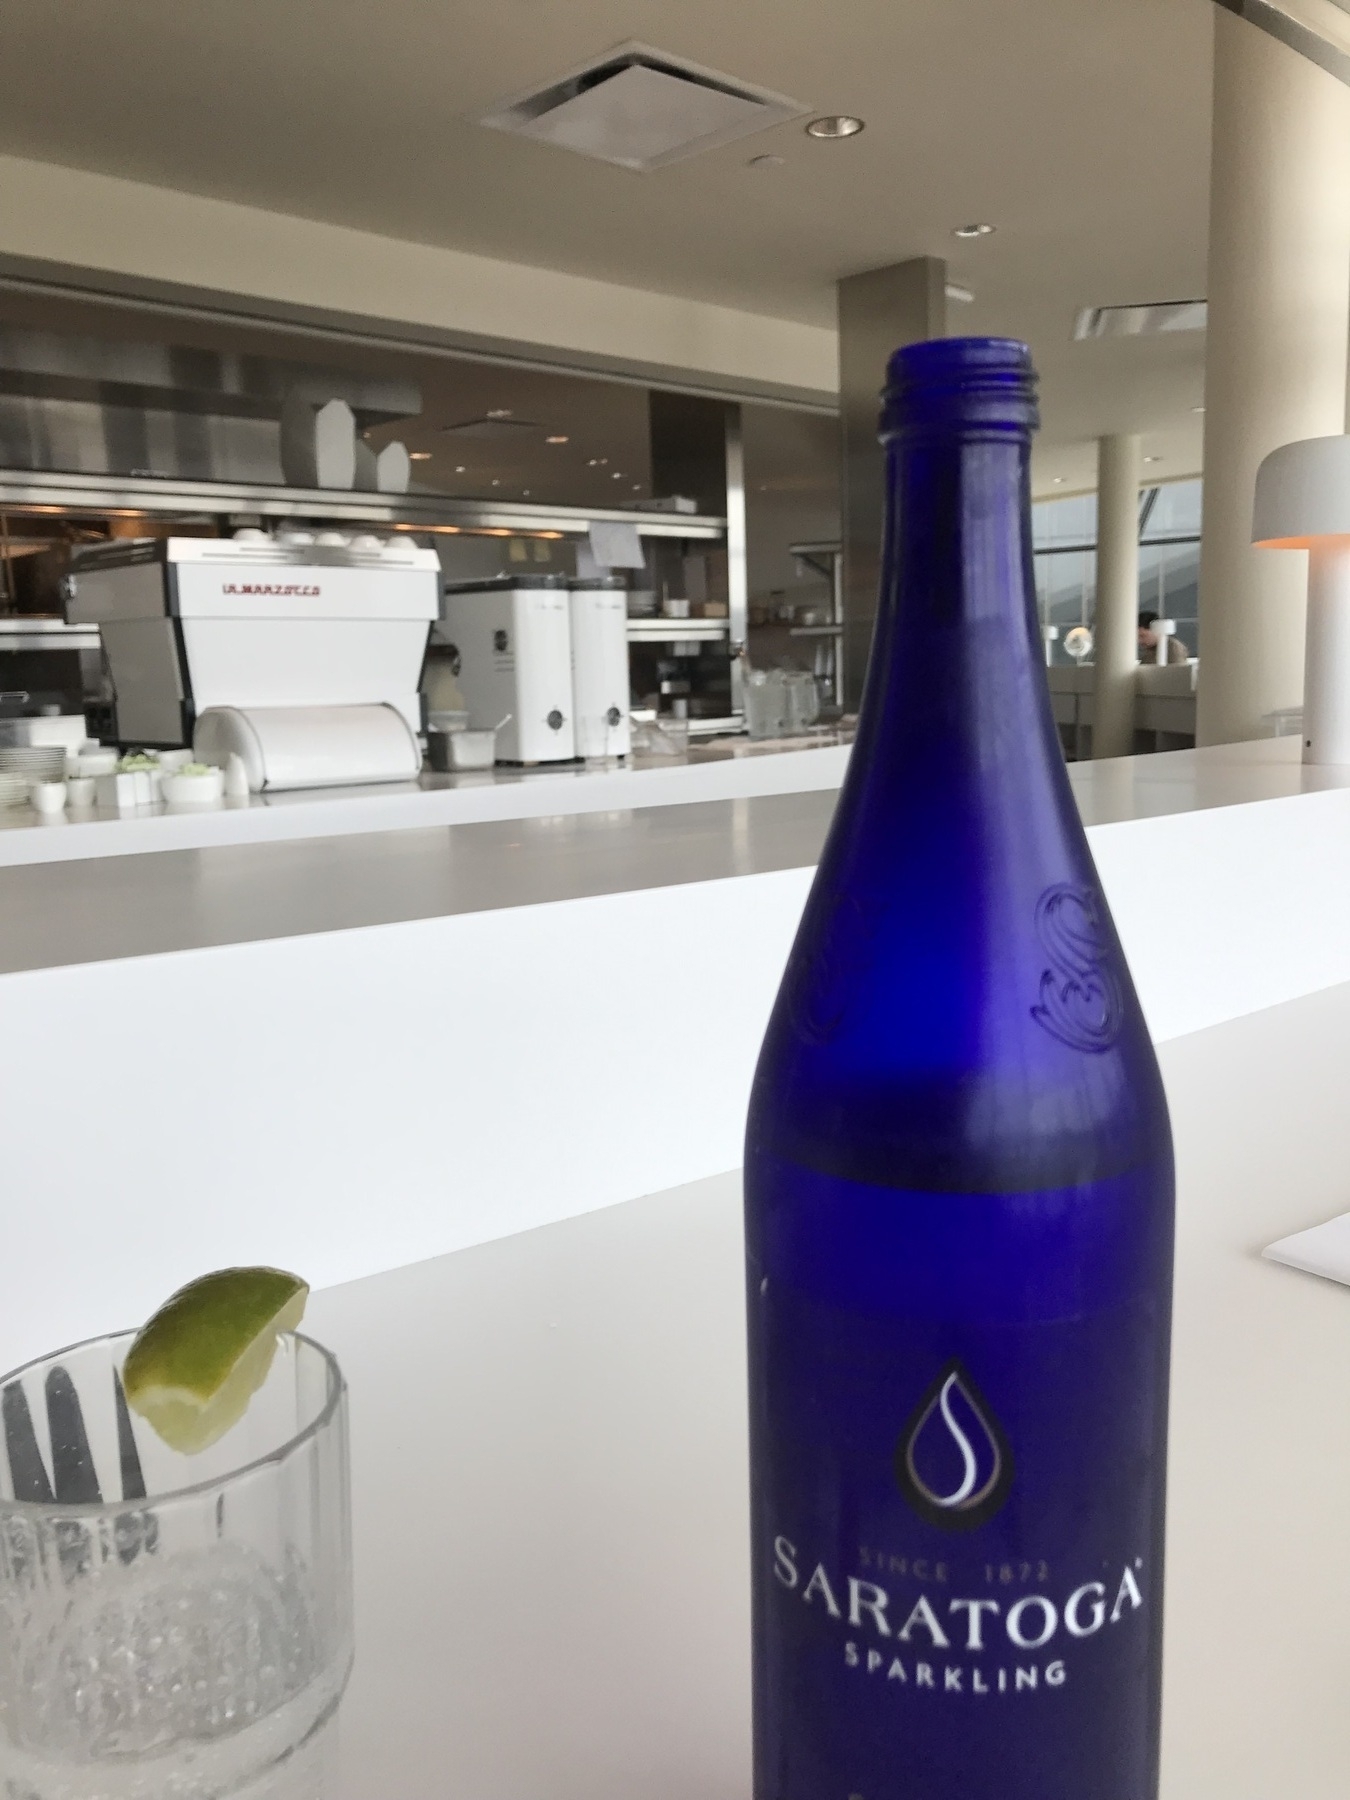 A blue bottle of sparkling water alongside a glass of sparkling water. In the background is a restaurant kitchen